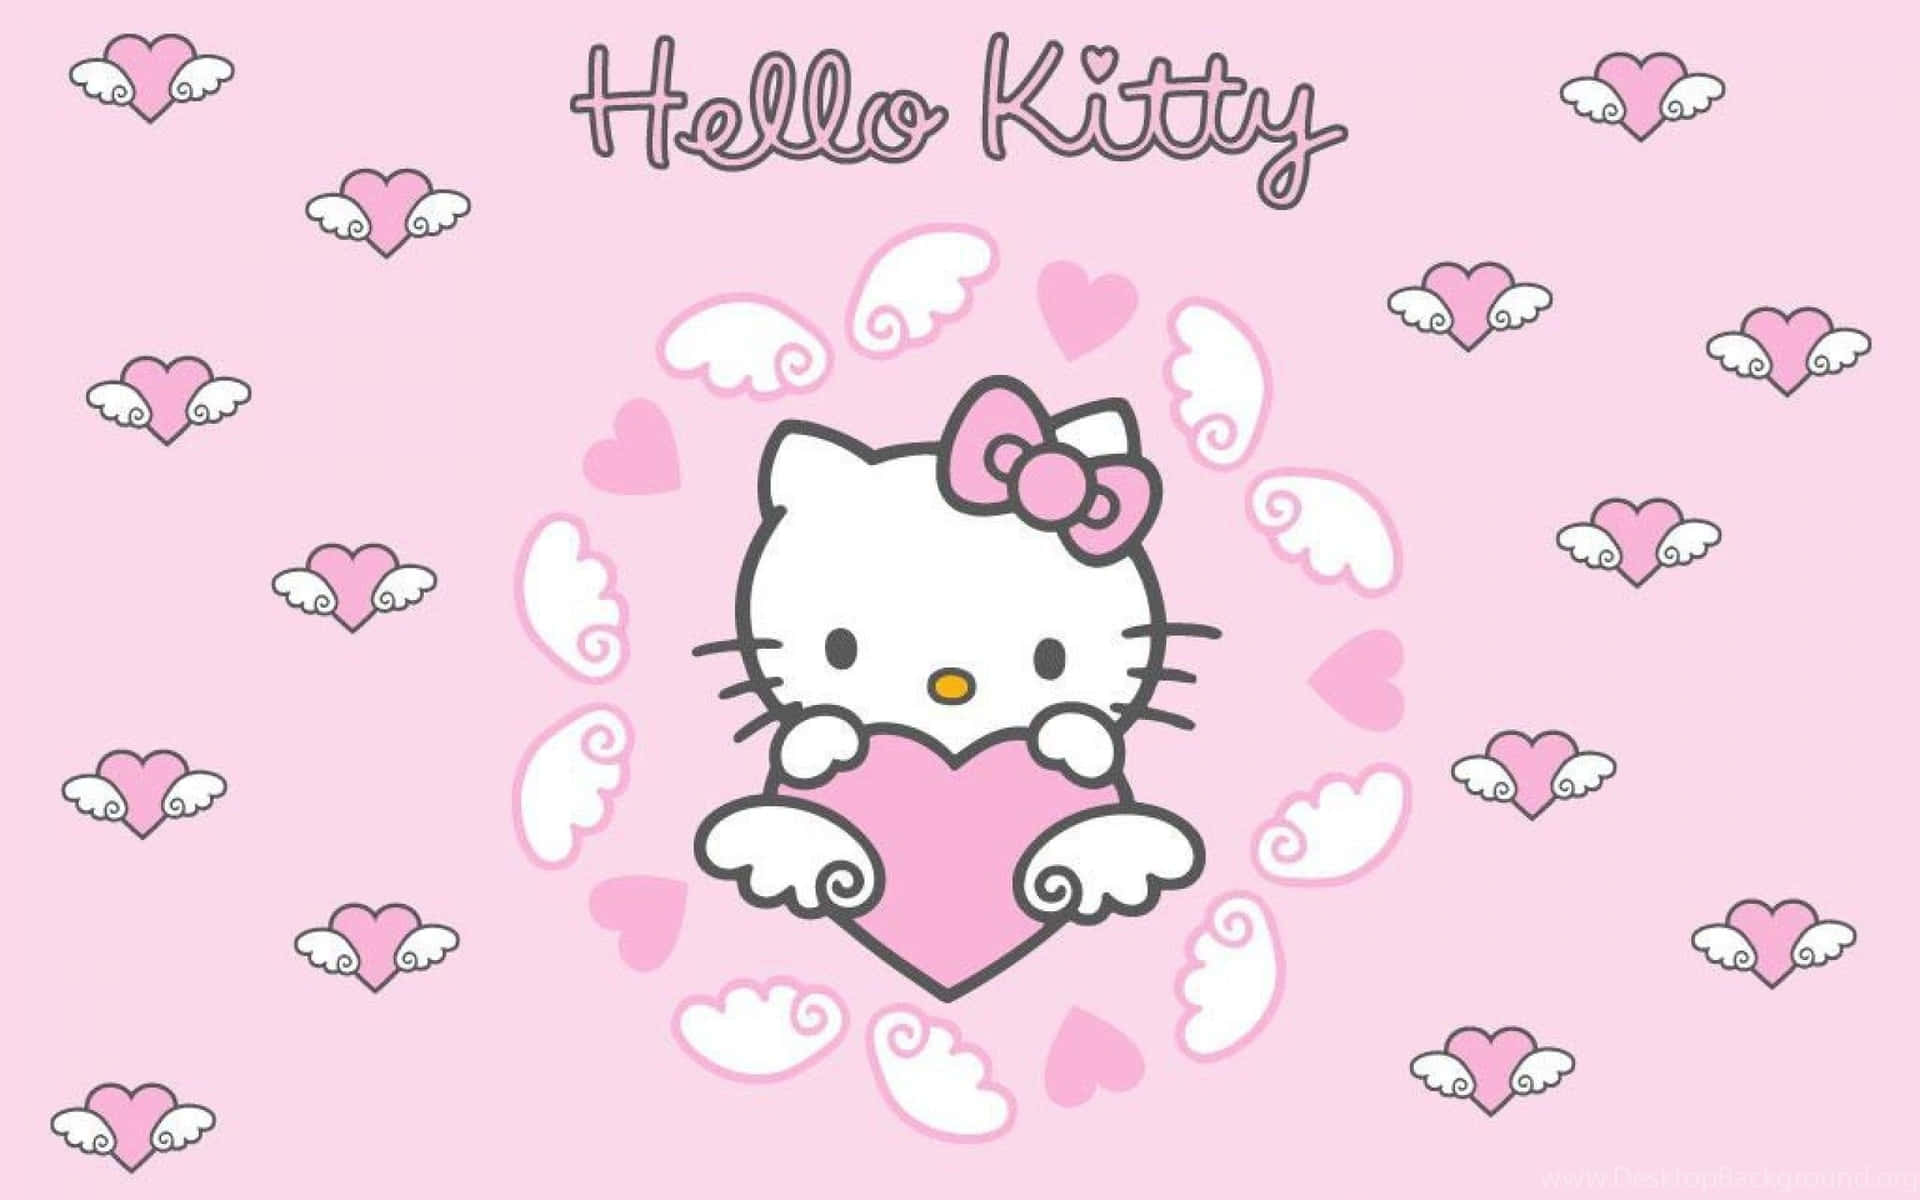 Get Ready To Take On The Day With A Hello Kitty PC! Wallpaper